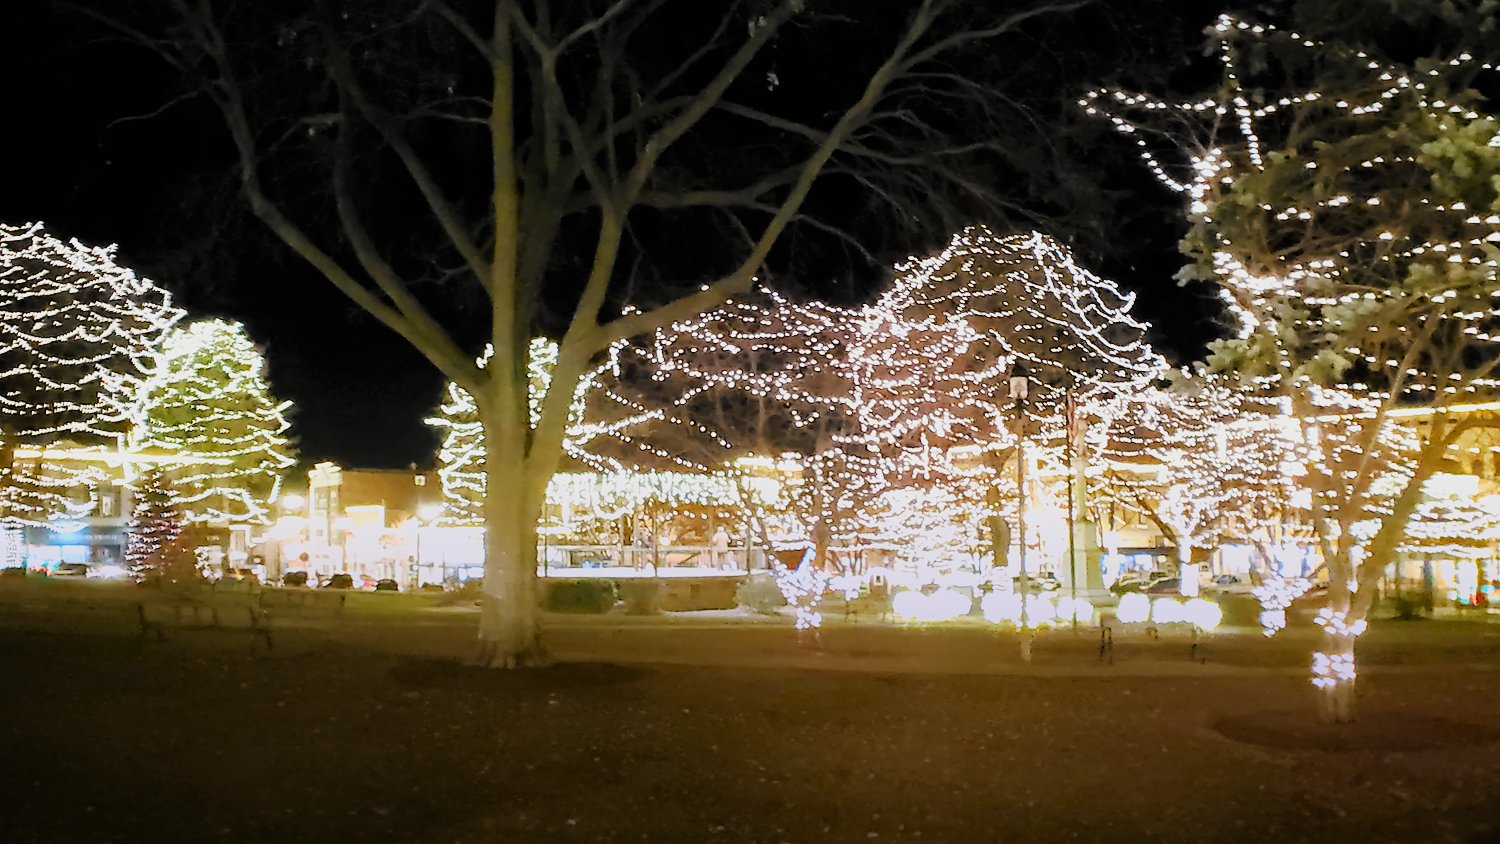 Christmas lights in the trees and around the bandstand at the Historic Square in Woodstock, IL.